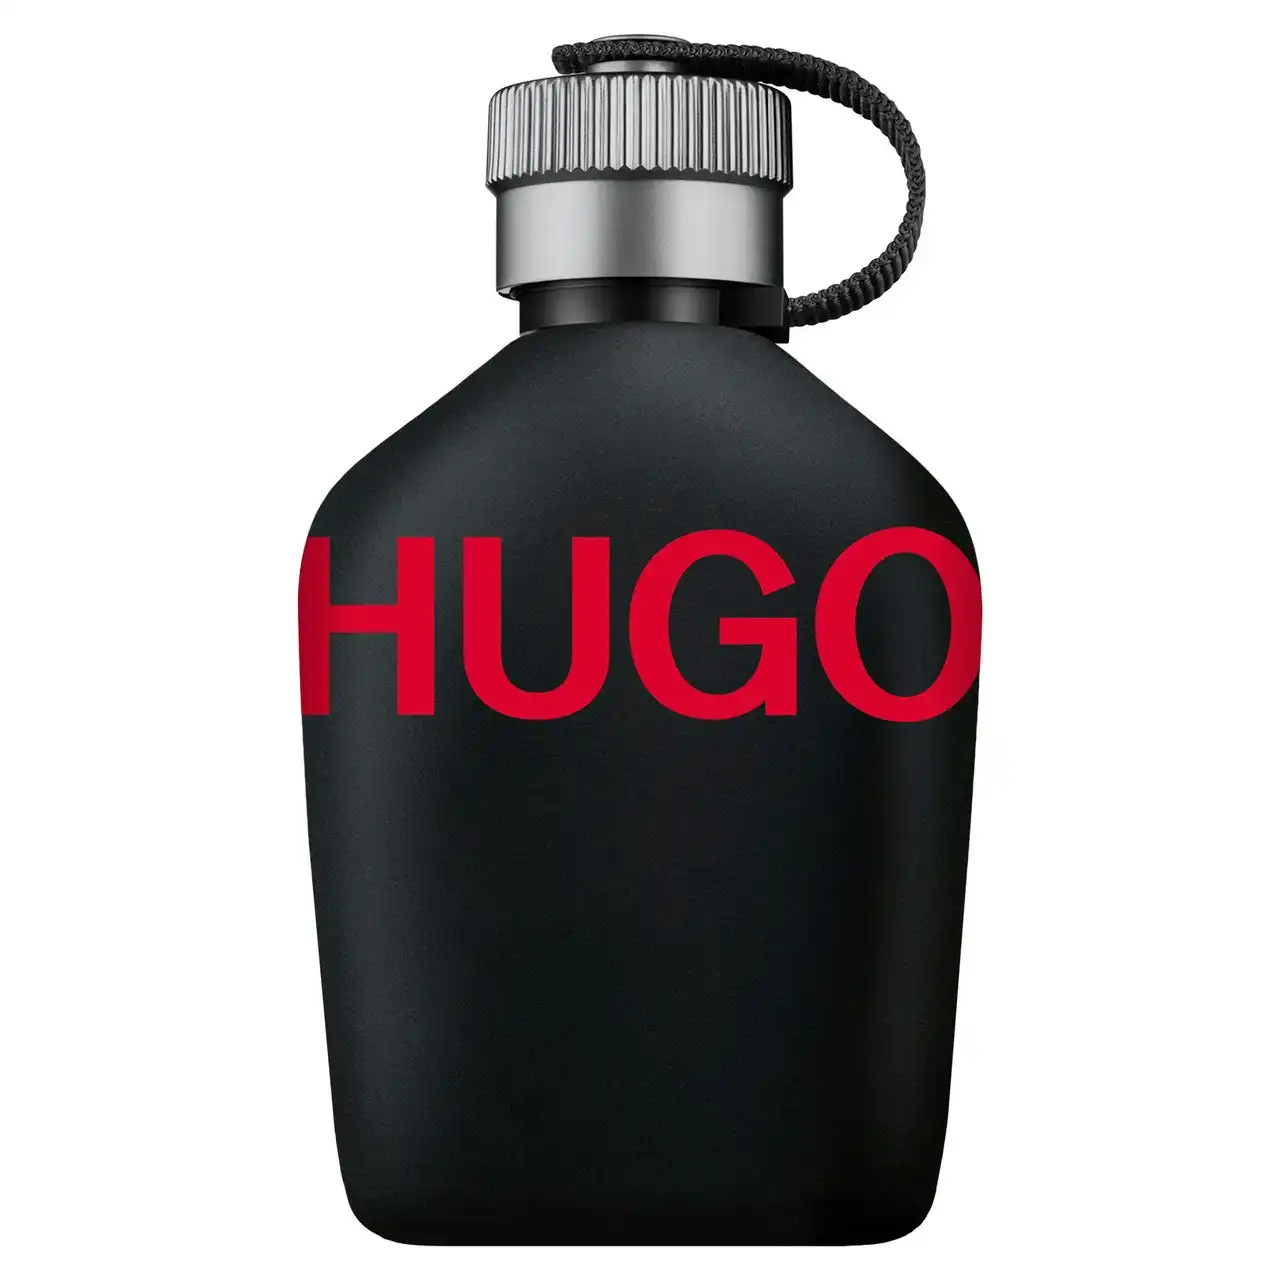 Just Different 125ml EDT By Hugo Boss (Mens)